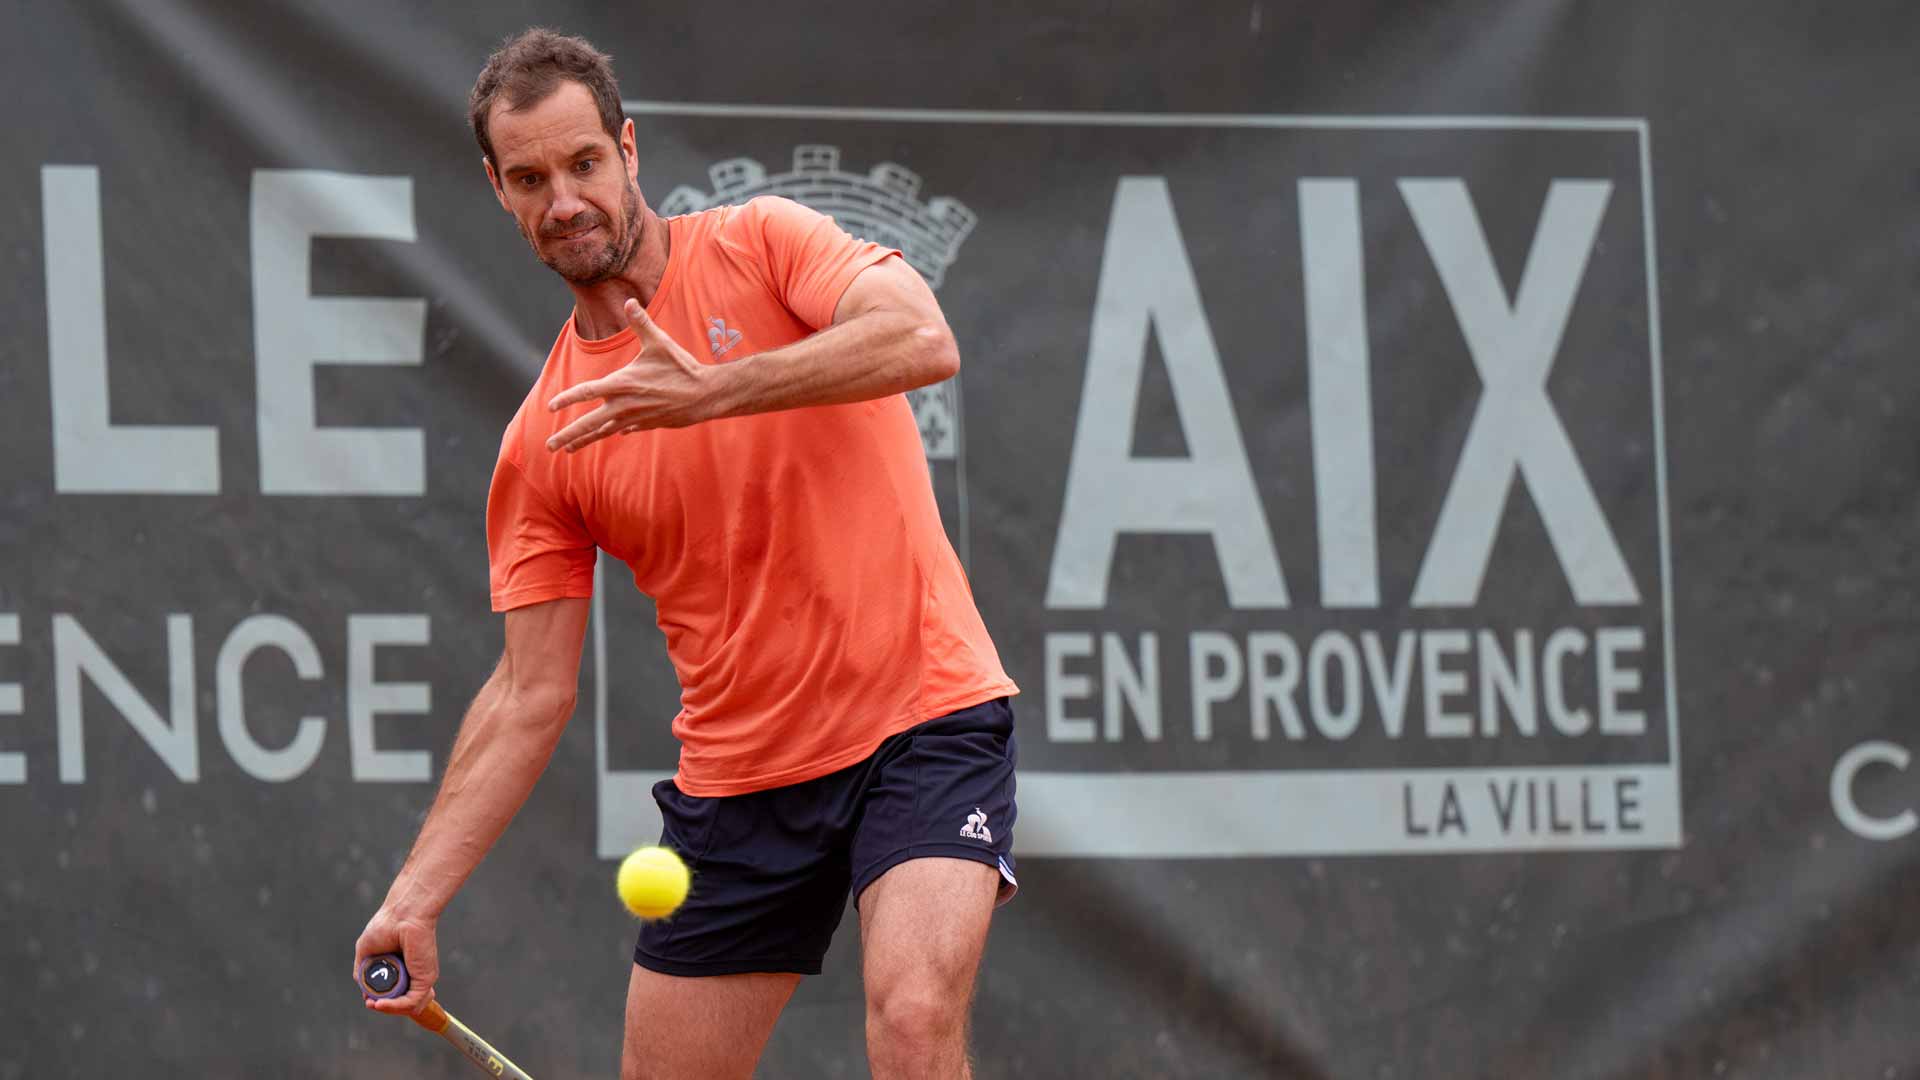 Watch Aix-en-Provence Challenger match of the day: Gasquet vs. Mayot